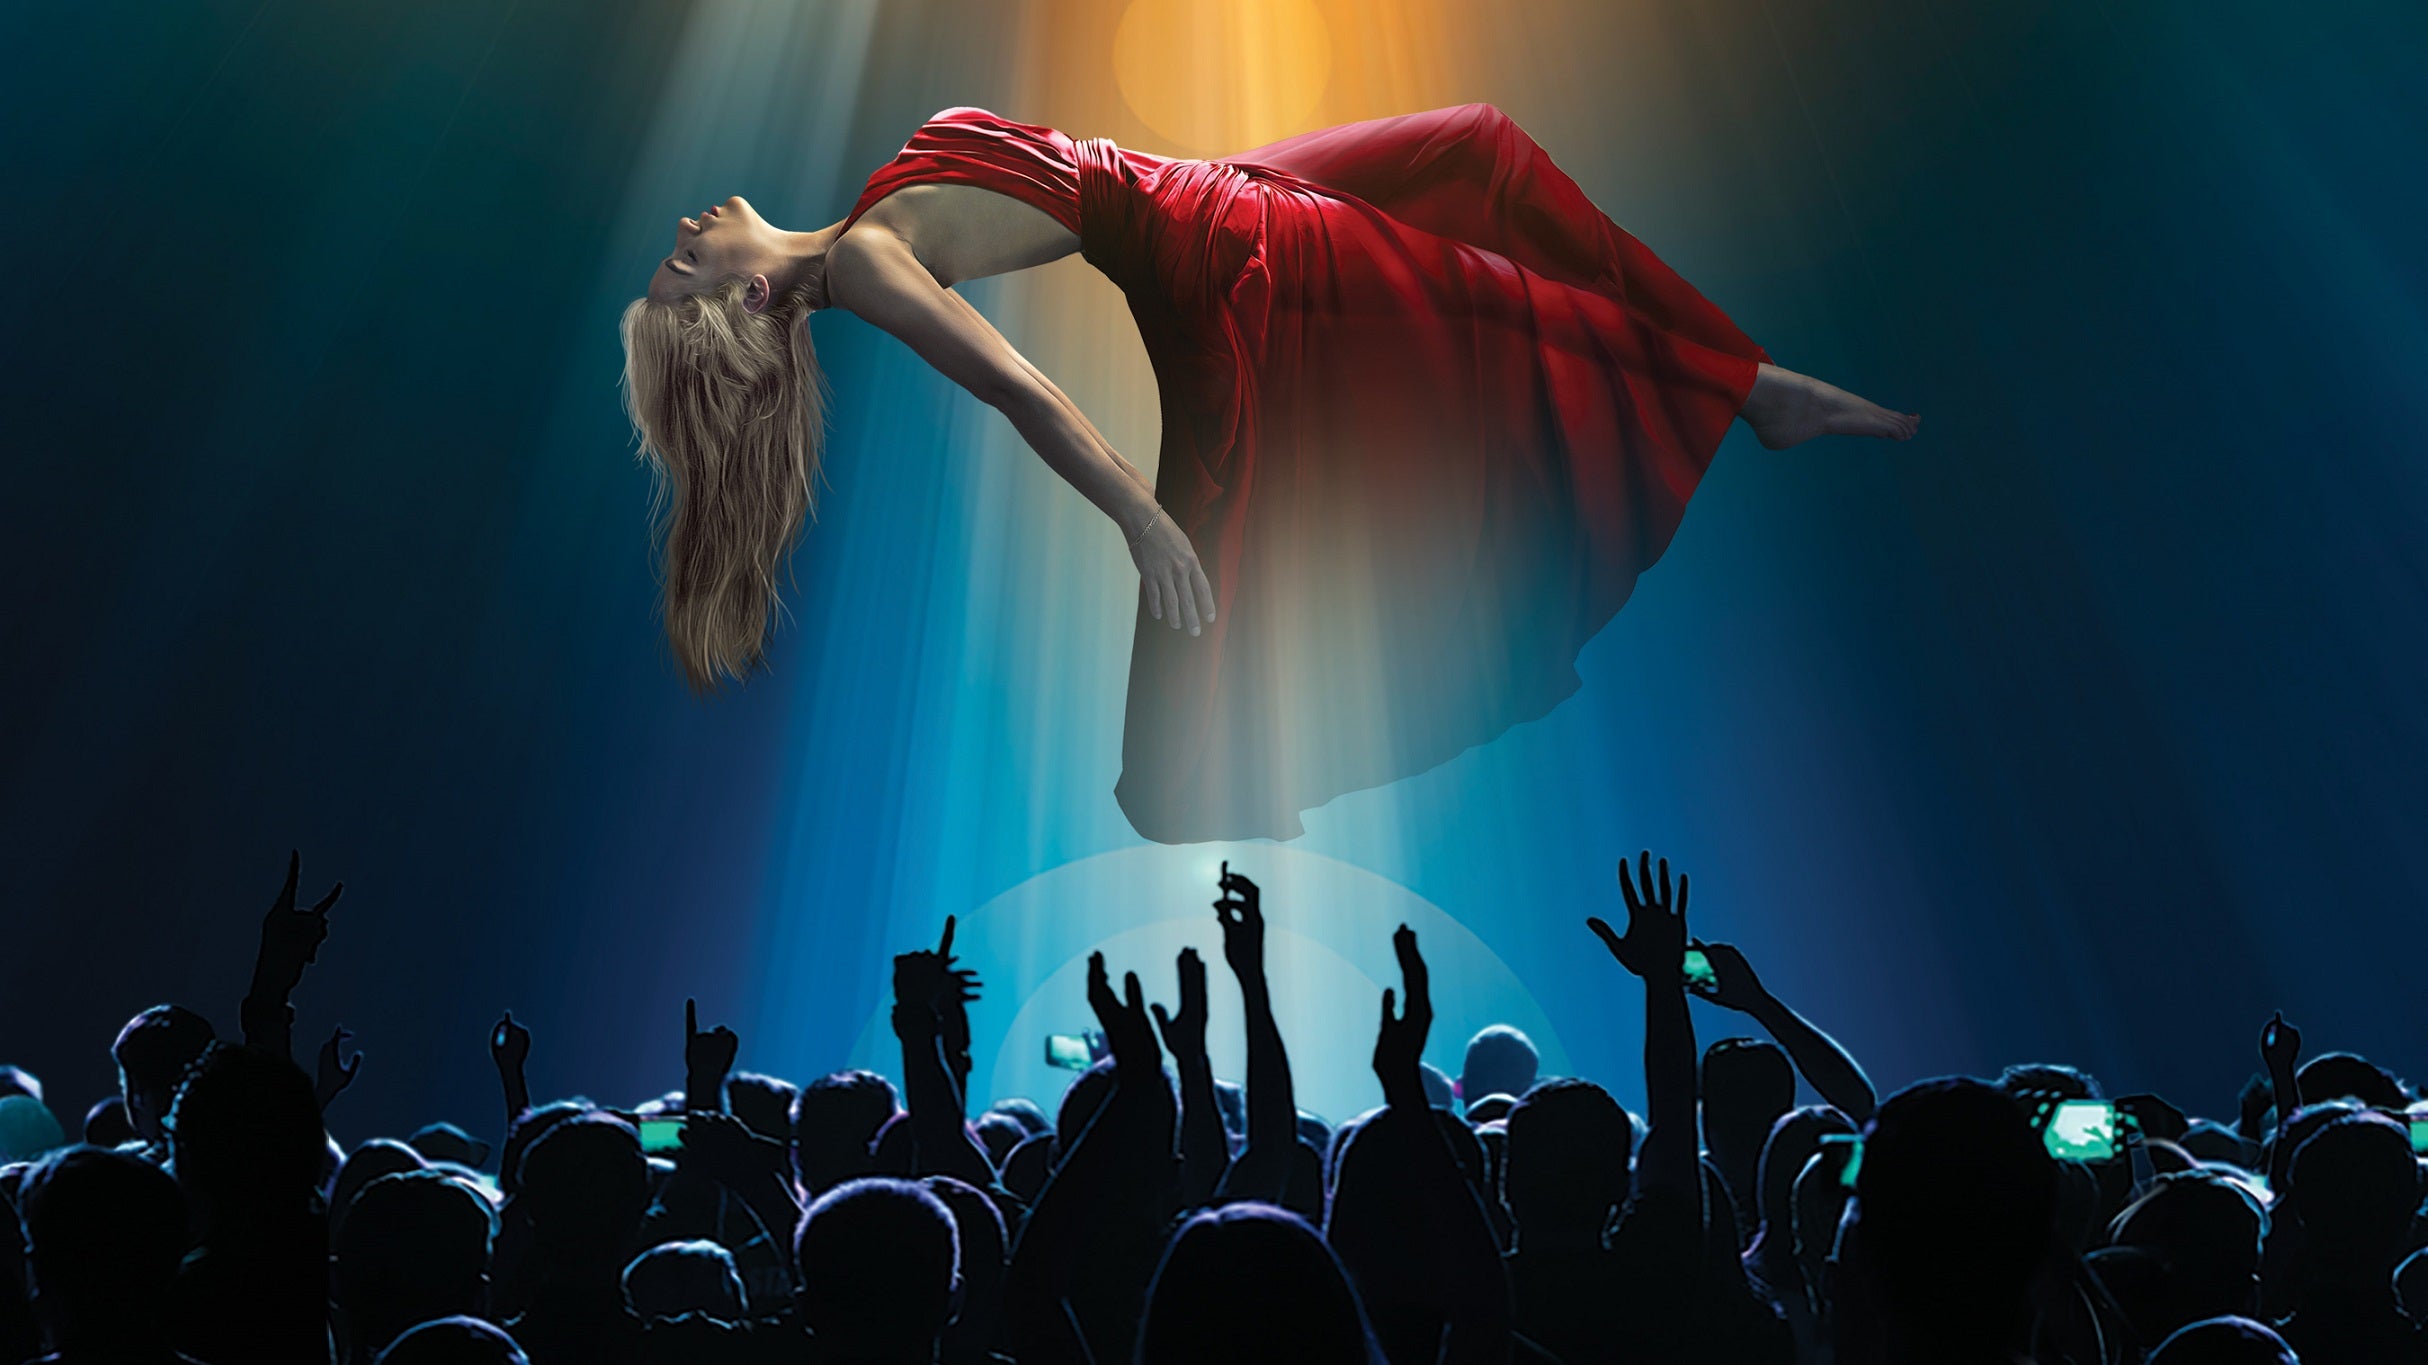 Masters of Illusion - Live! in Valley Center promo photo for Caesars Rewards presale offer code